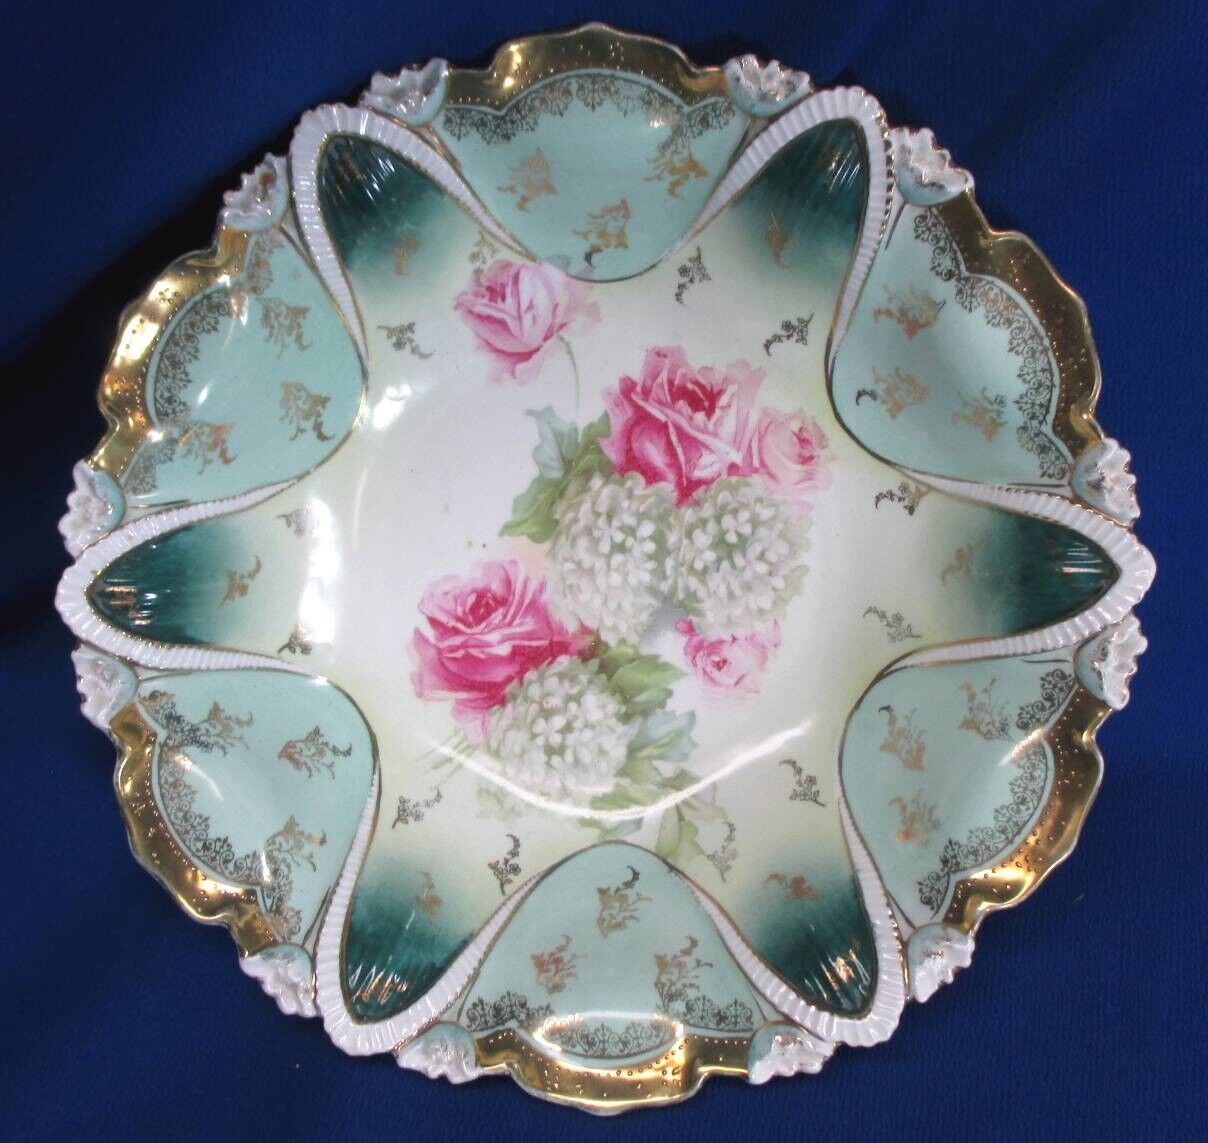 RS PRUSSIA RED WREATH MARK ROSES & SNOWBALLS TEAL & GOLD BOWL